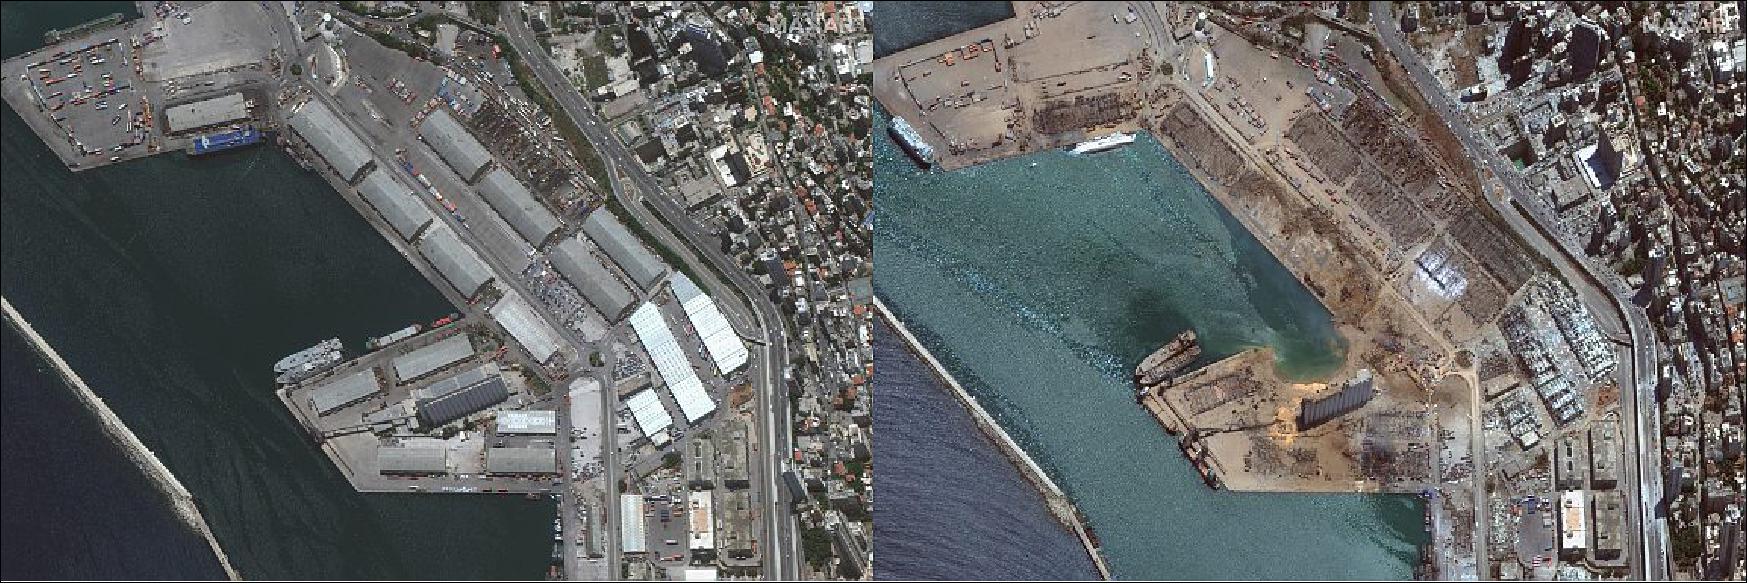 Figure 11: WorldView satellite capture of the port of Beirut prior to (left) and post (right) explosion (image credit: ©2020 Maxar Technologies)